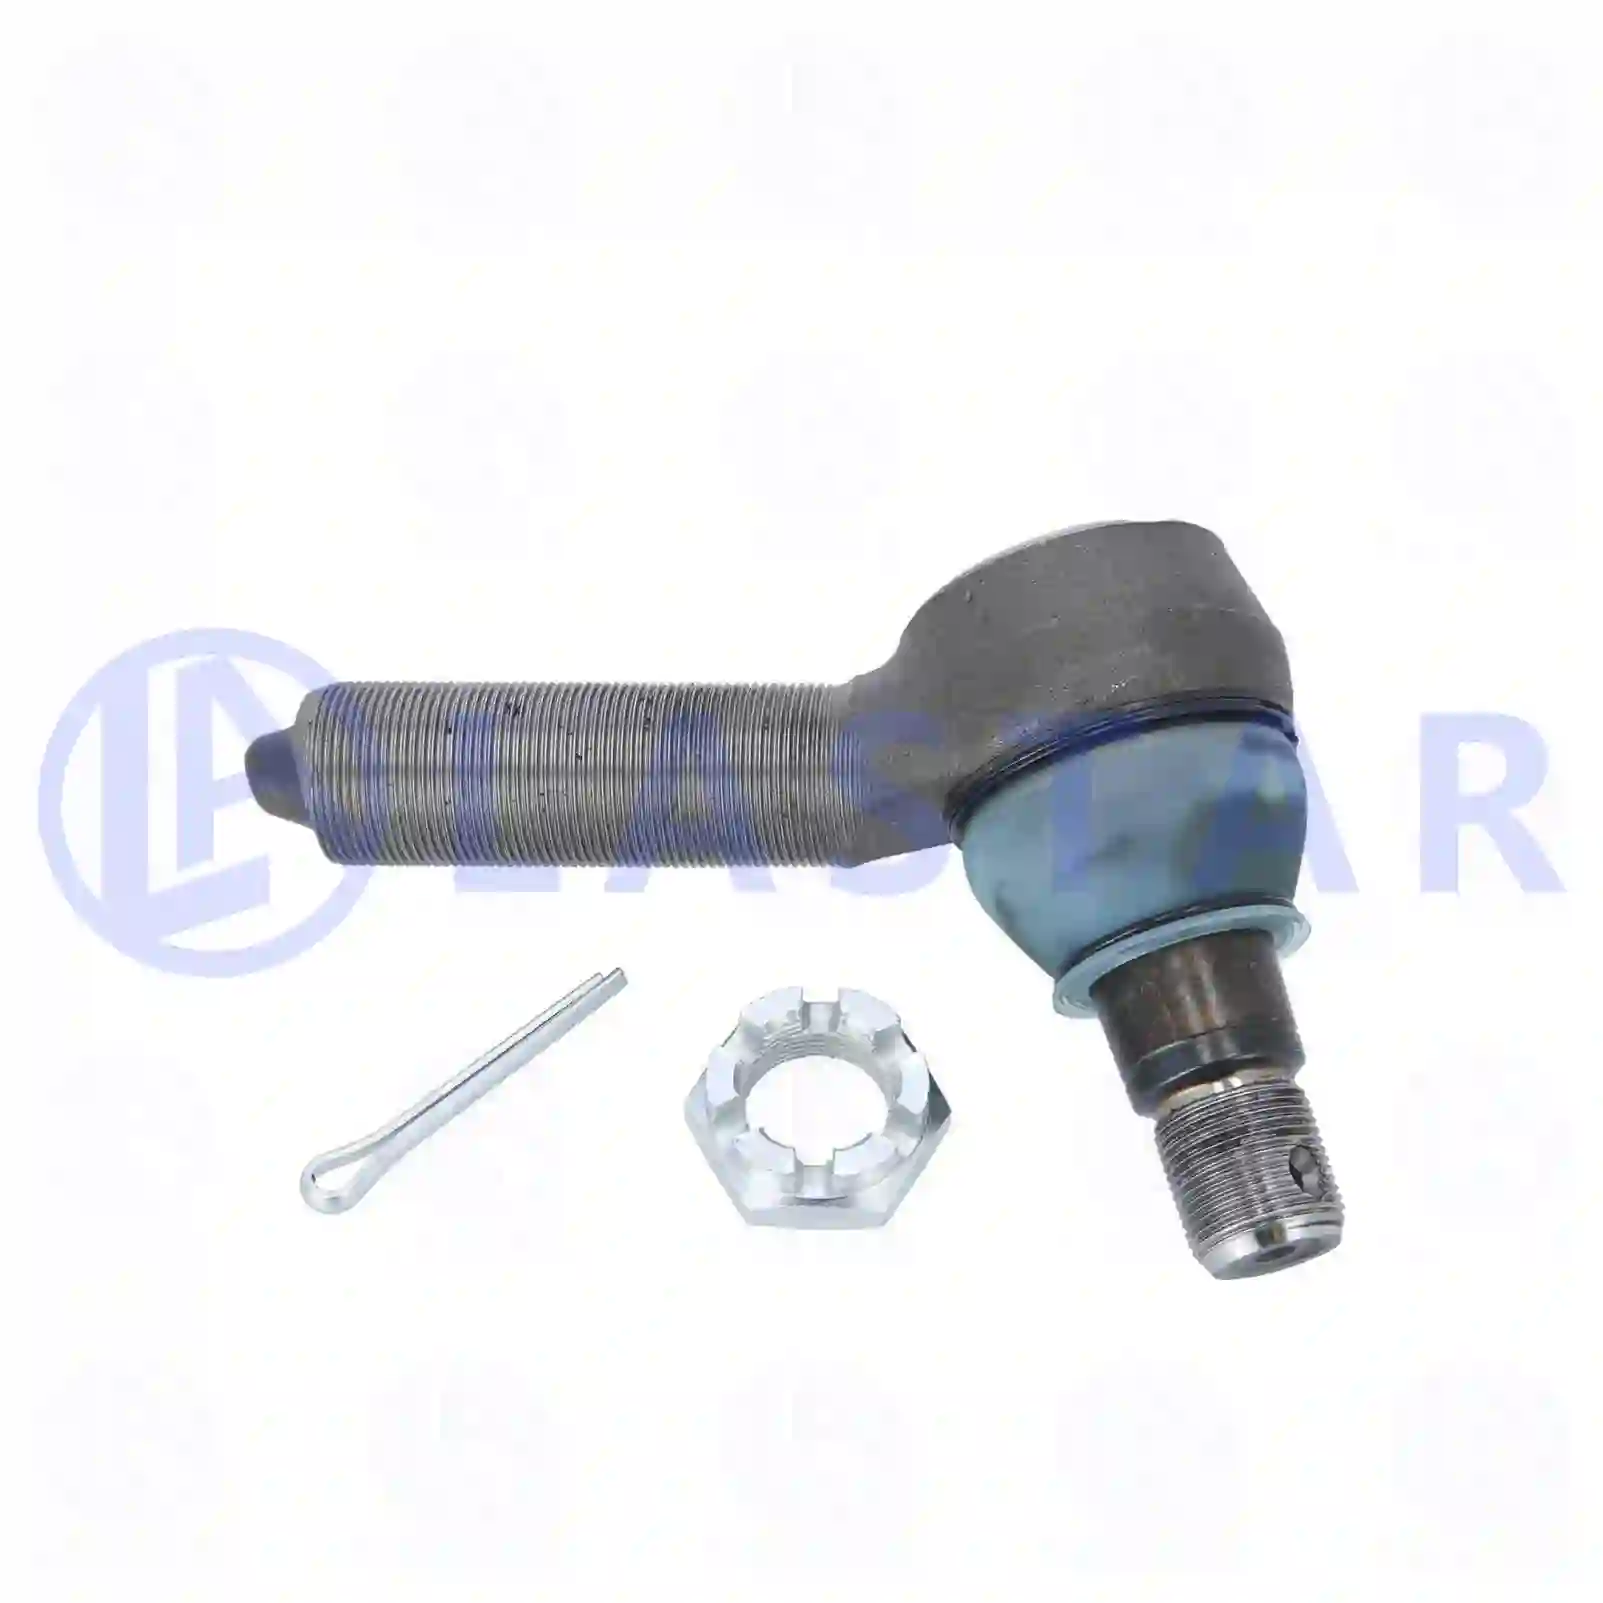 Ball joint, right hand thread, 77705796, 81953016288, 0004605248, 0014609048, 7420894438, 7421580396, 20894438, 21580396, 2V5422817, ZG40383-0008 ||  77705796 Lastar Spare Part | Truck Spare Parts, Auotomotive Spare Parts Ball joint, right hand thread, 77705796, 81953016288, 0004605248, 0014609048, 7420894438, 7421580396, 20894438, 21580396, 2V5422817, ZG40383-0008 ||  77705796 Lastar Spare Part | Truck Spare Parts, Auotomotive Spare Parts